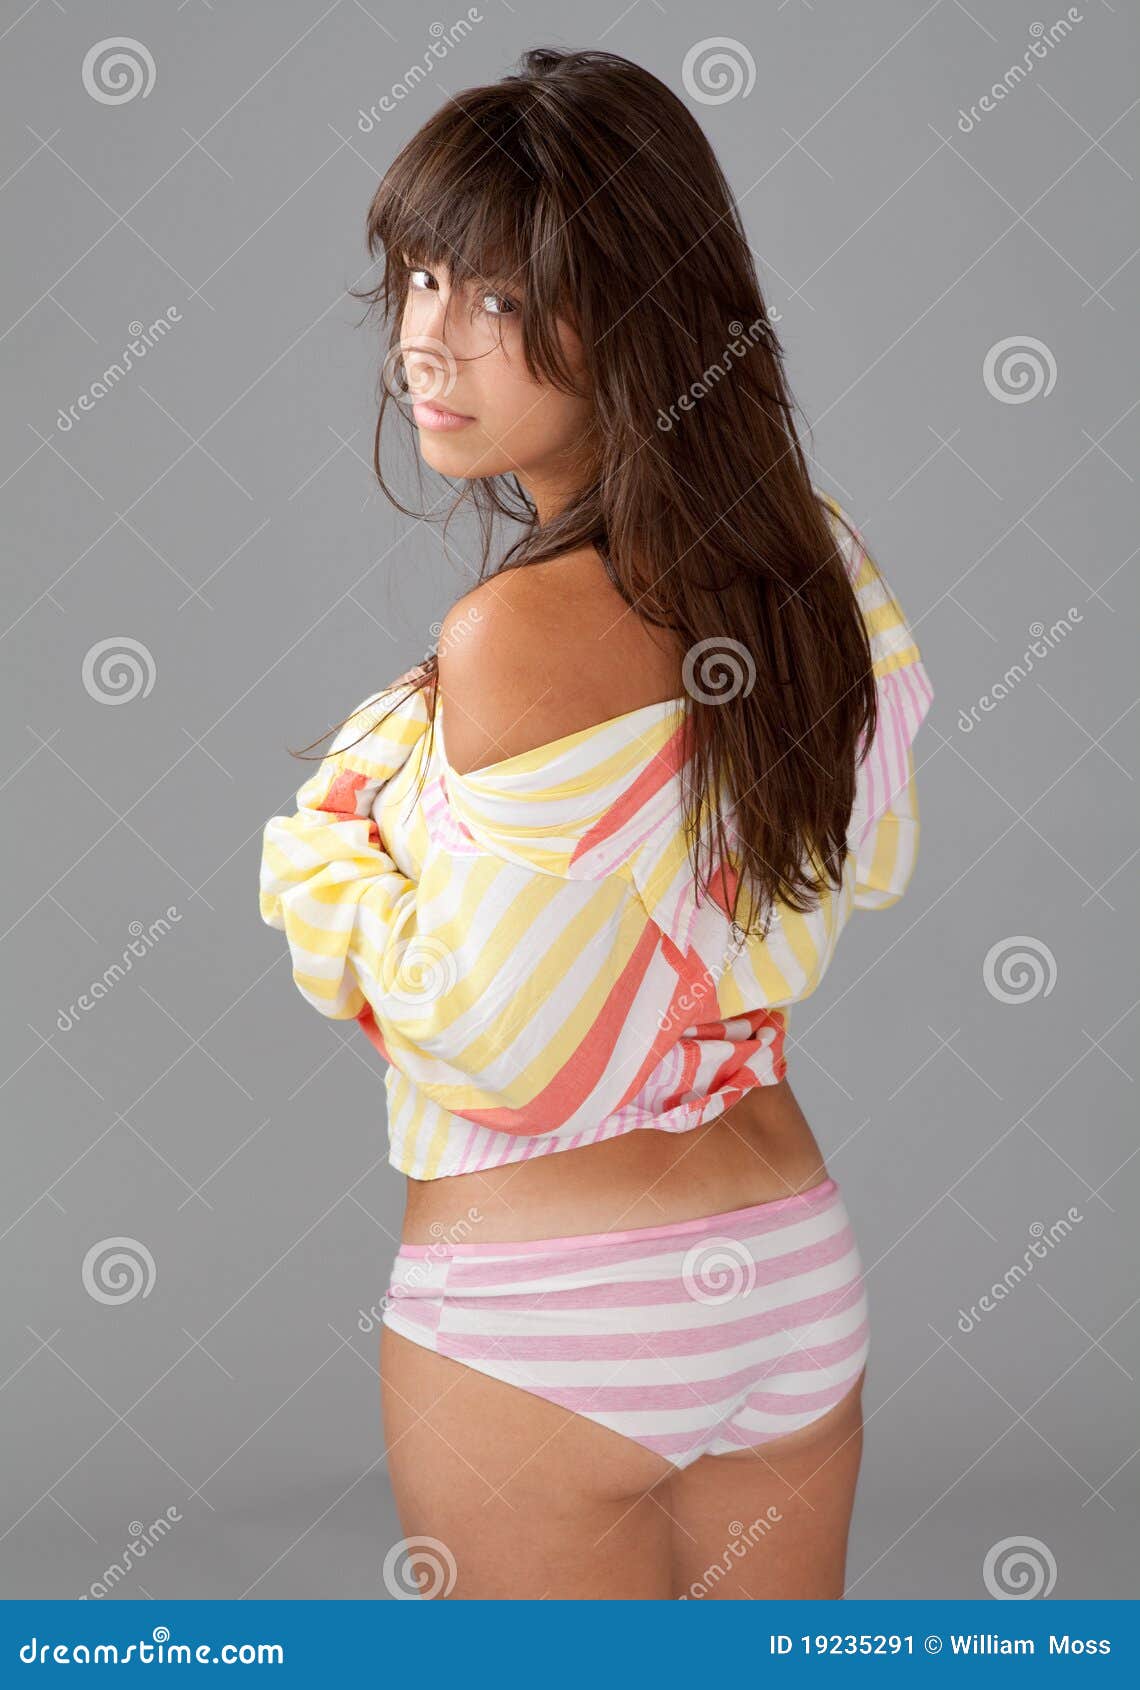 Woman in Top and Underwear stock image. Image of flirt - 19235291